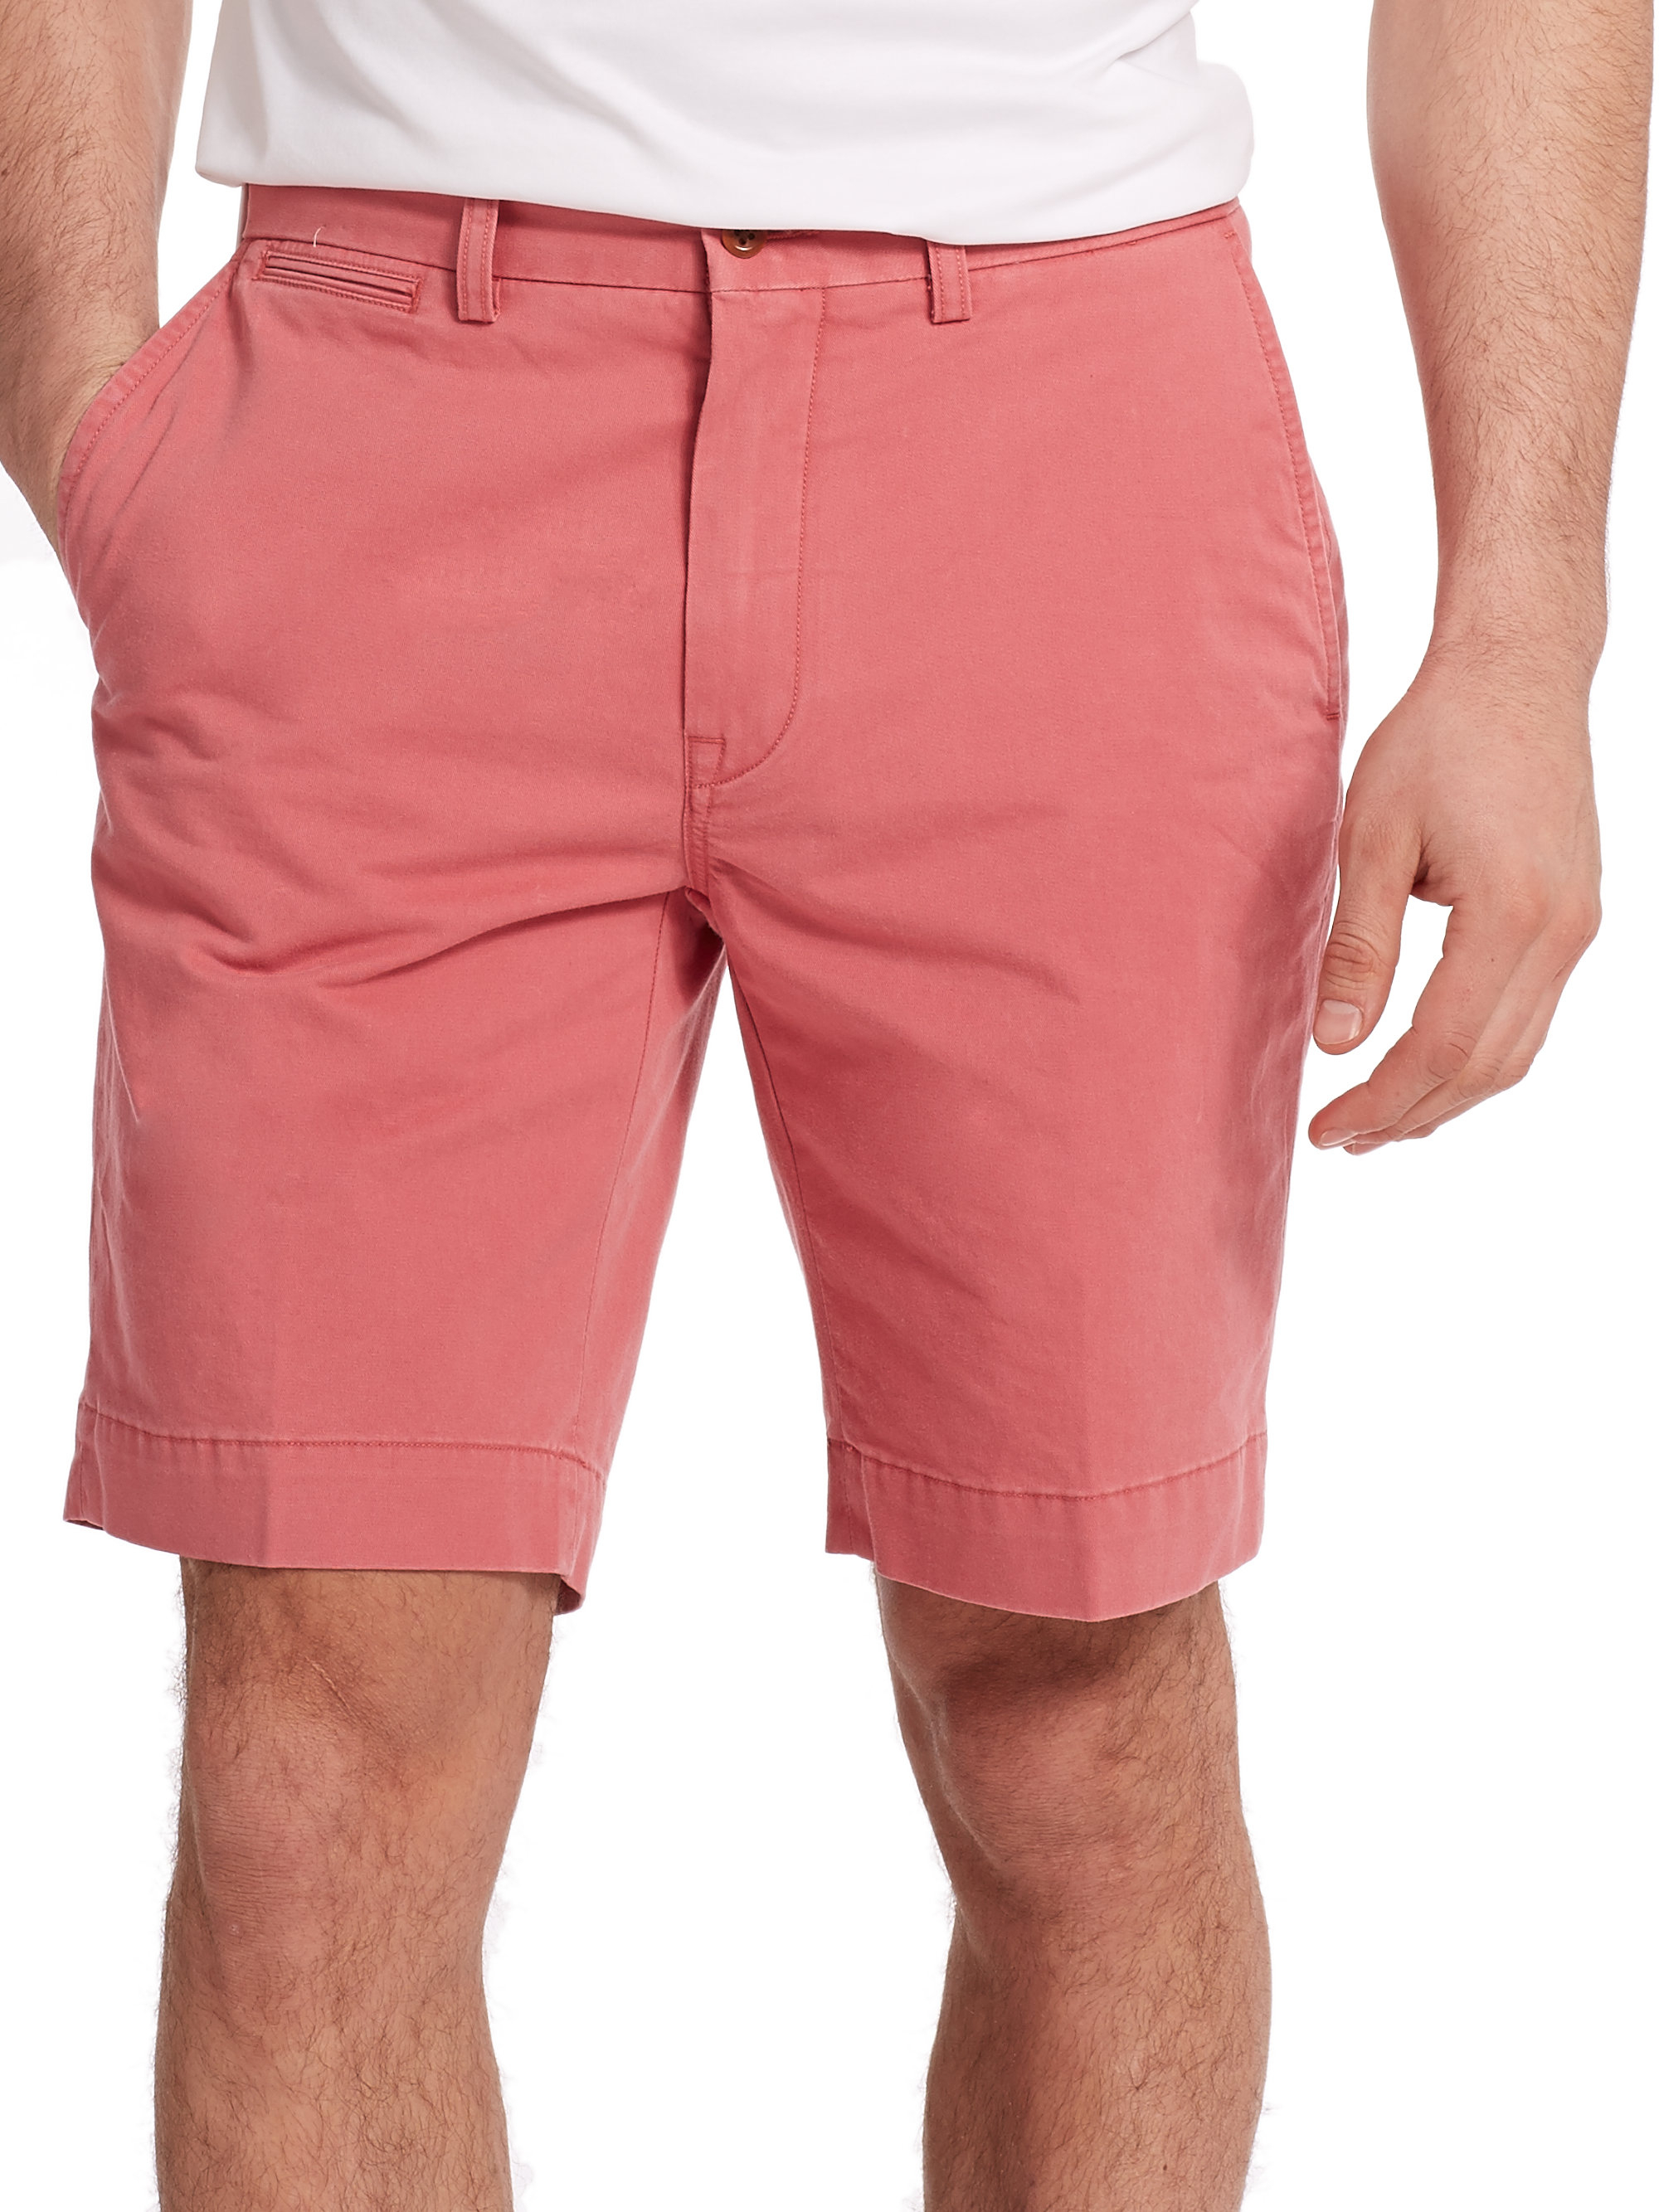 Lyst - Polo Ralph Lauren Classic-Fit Lightweight Chino Shorts in Pink ...